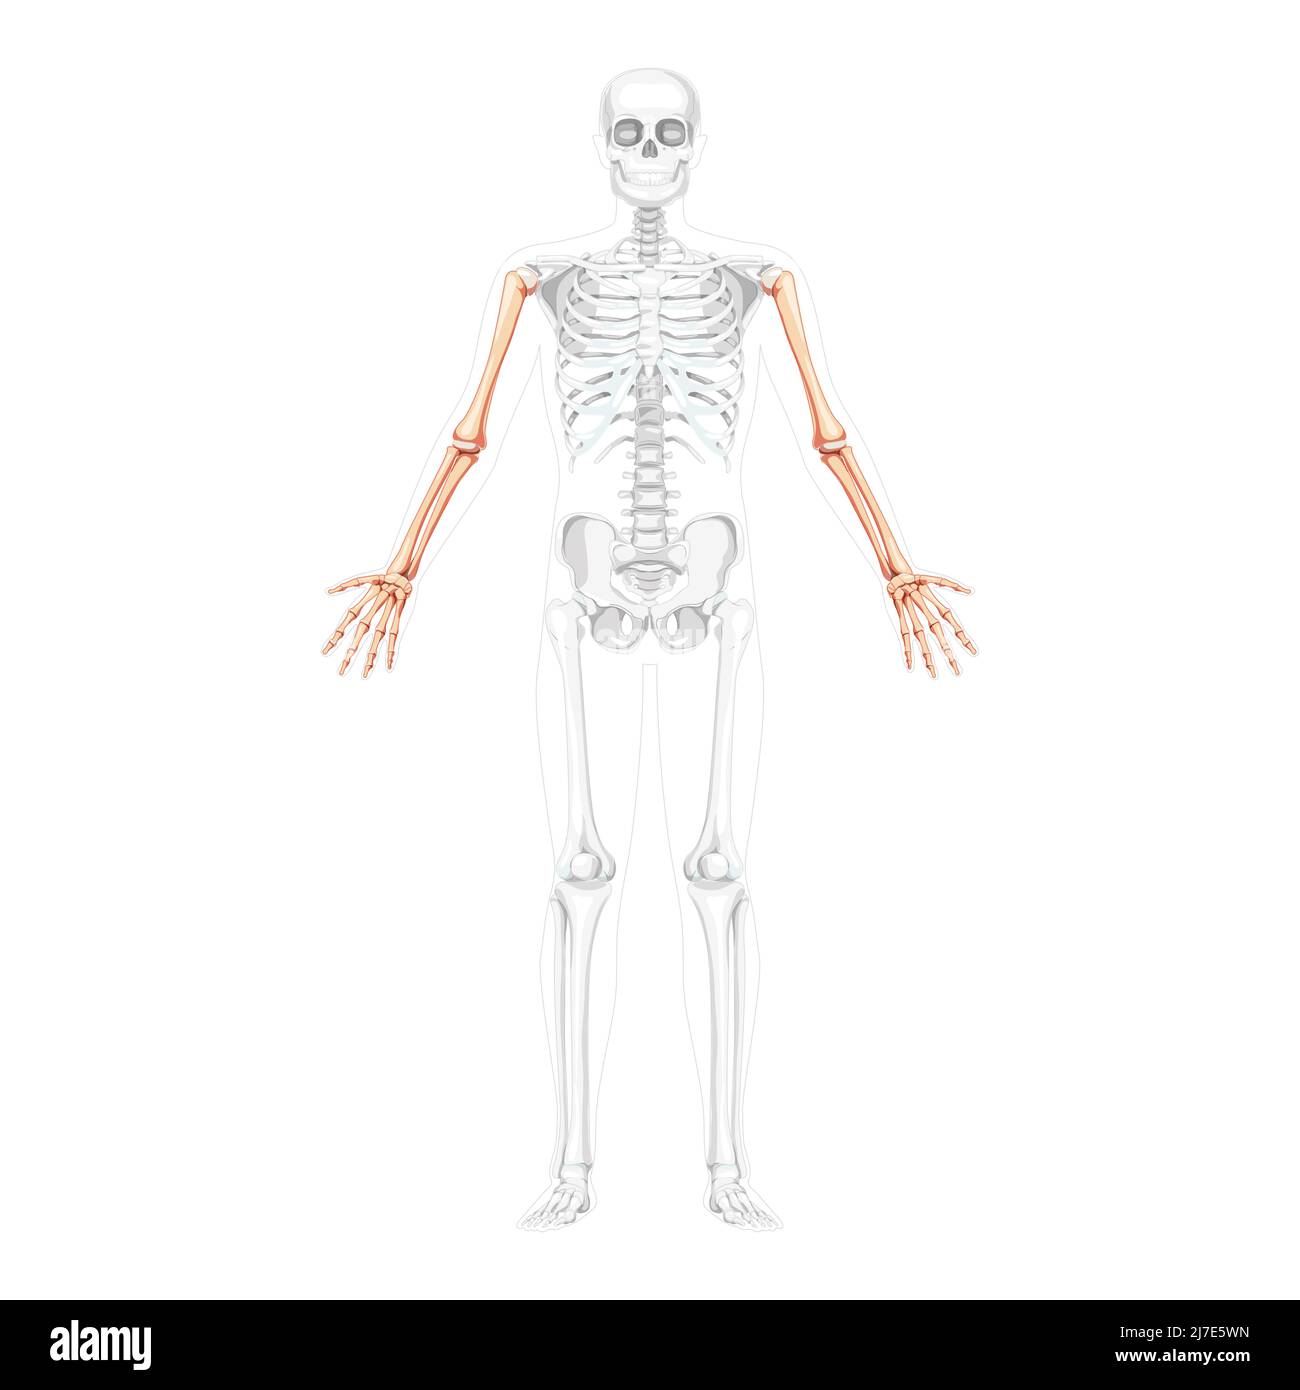 Skeleton Arms Human front Anterior ventral view with partly transparent bones position. Hands, forearms realistic flat natural color concept Vector illustration of anatomy isolated on white background Stock Vector